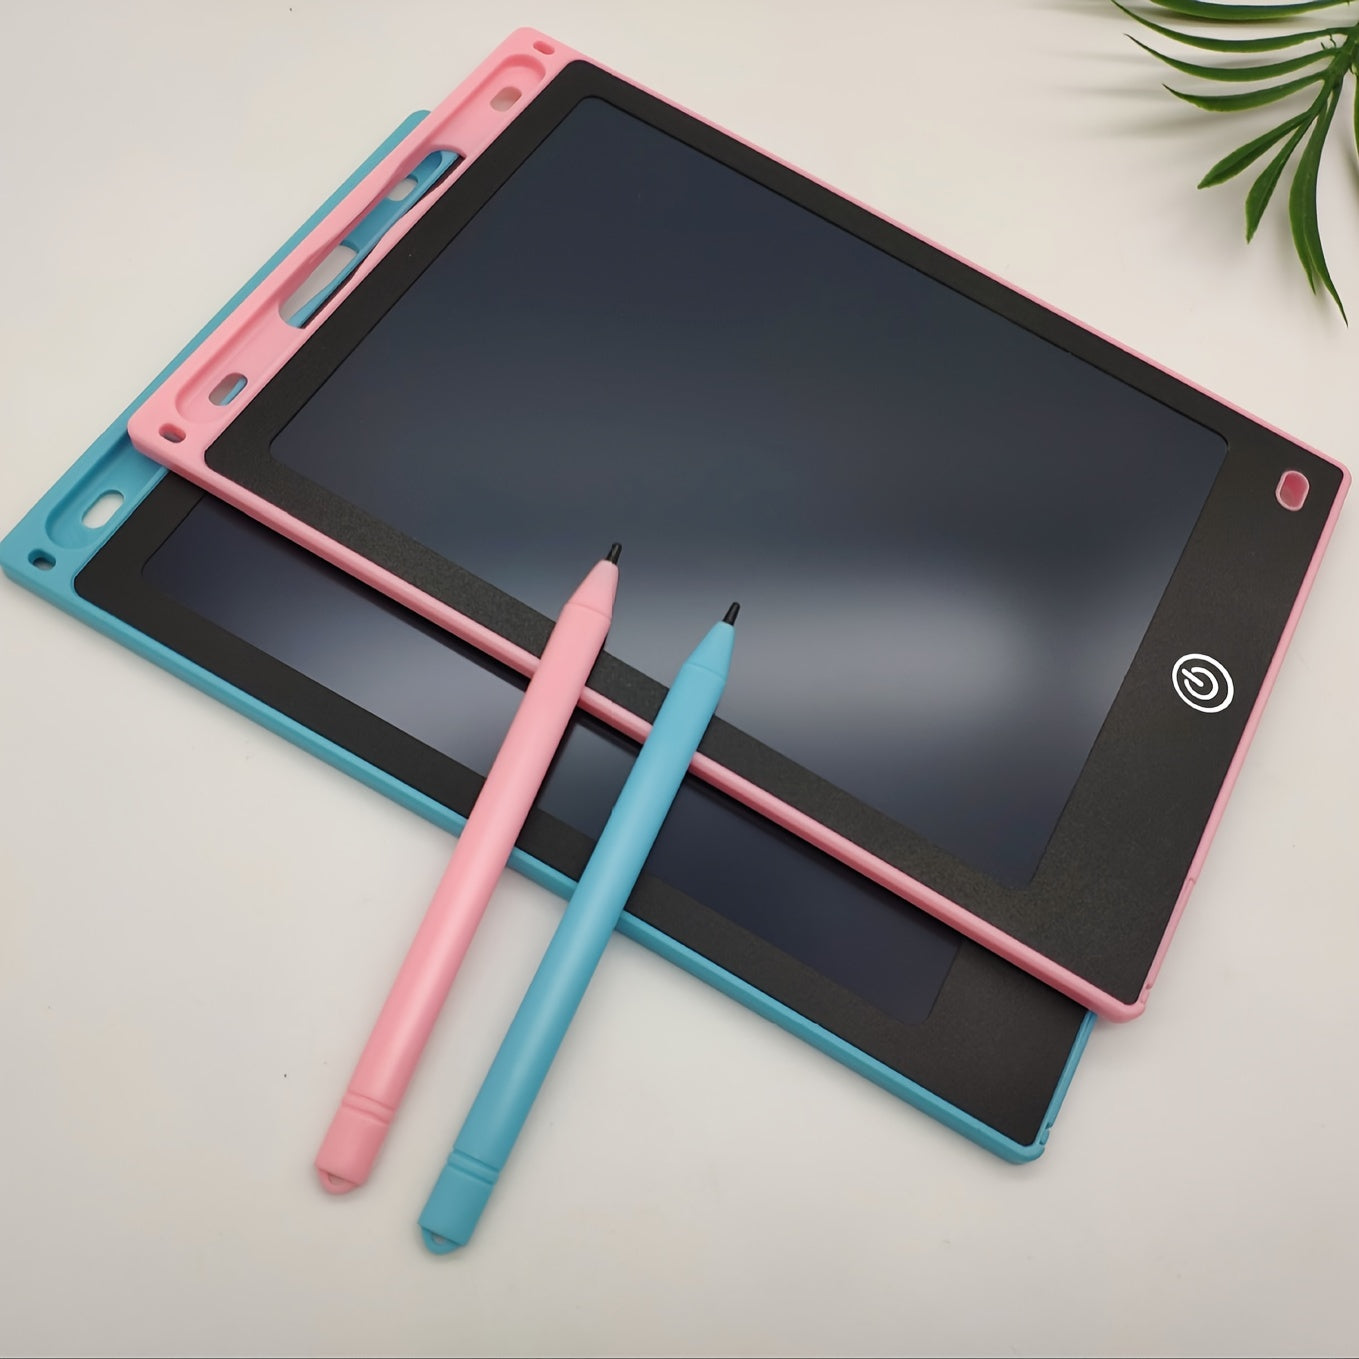 LCD Writing & Drawing Tablet 21.6cm